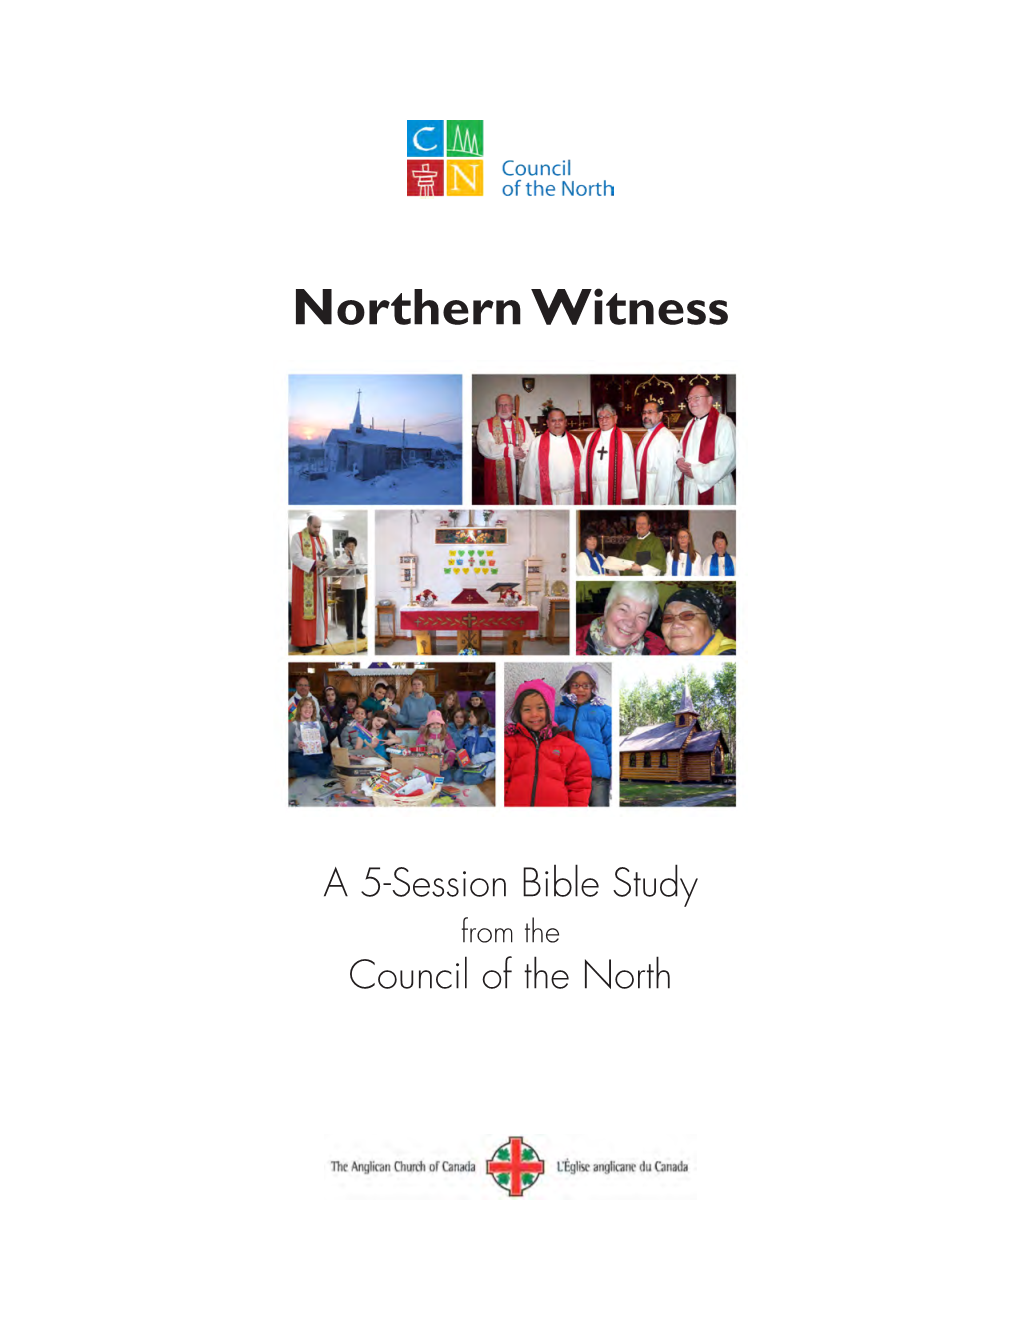 Download a PDF Copy of Northern Witness